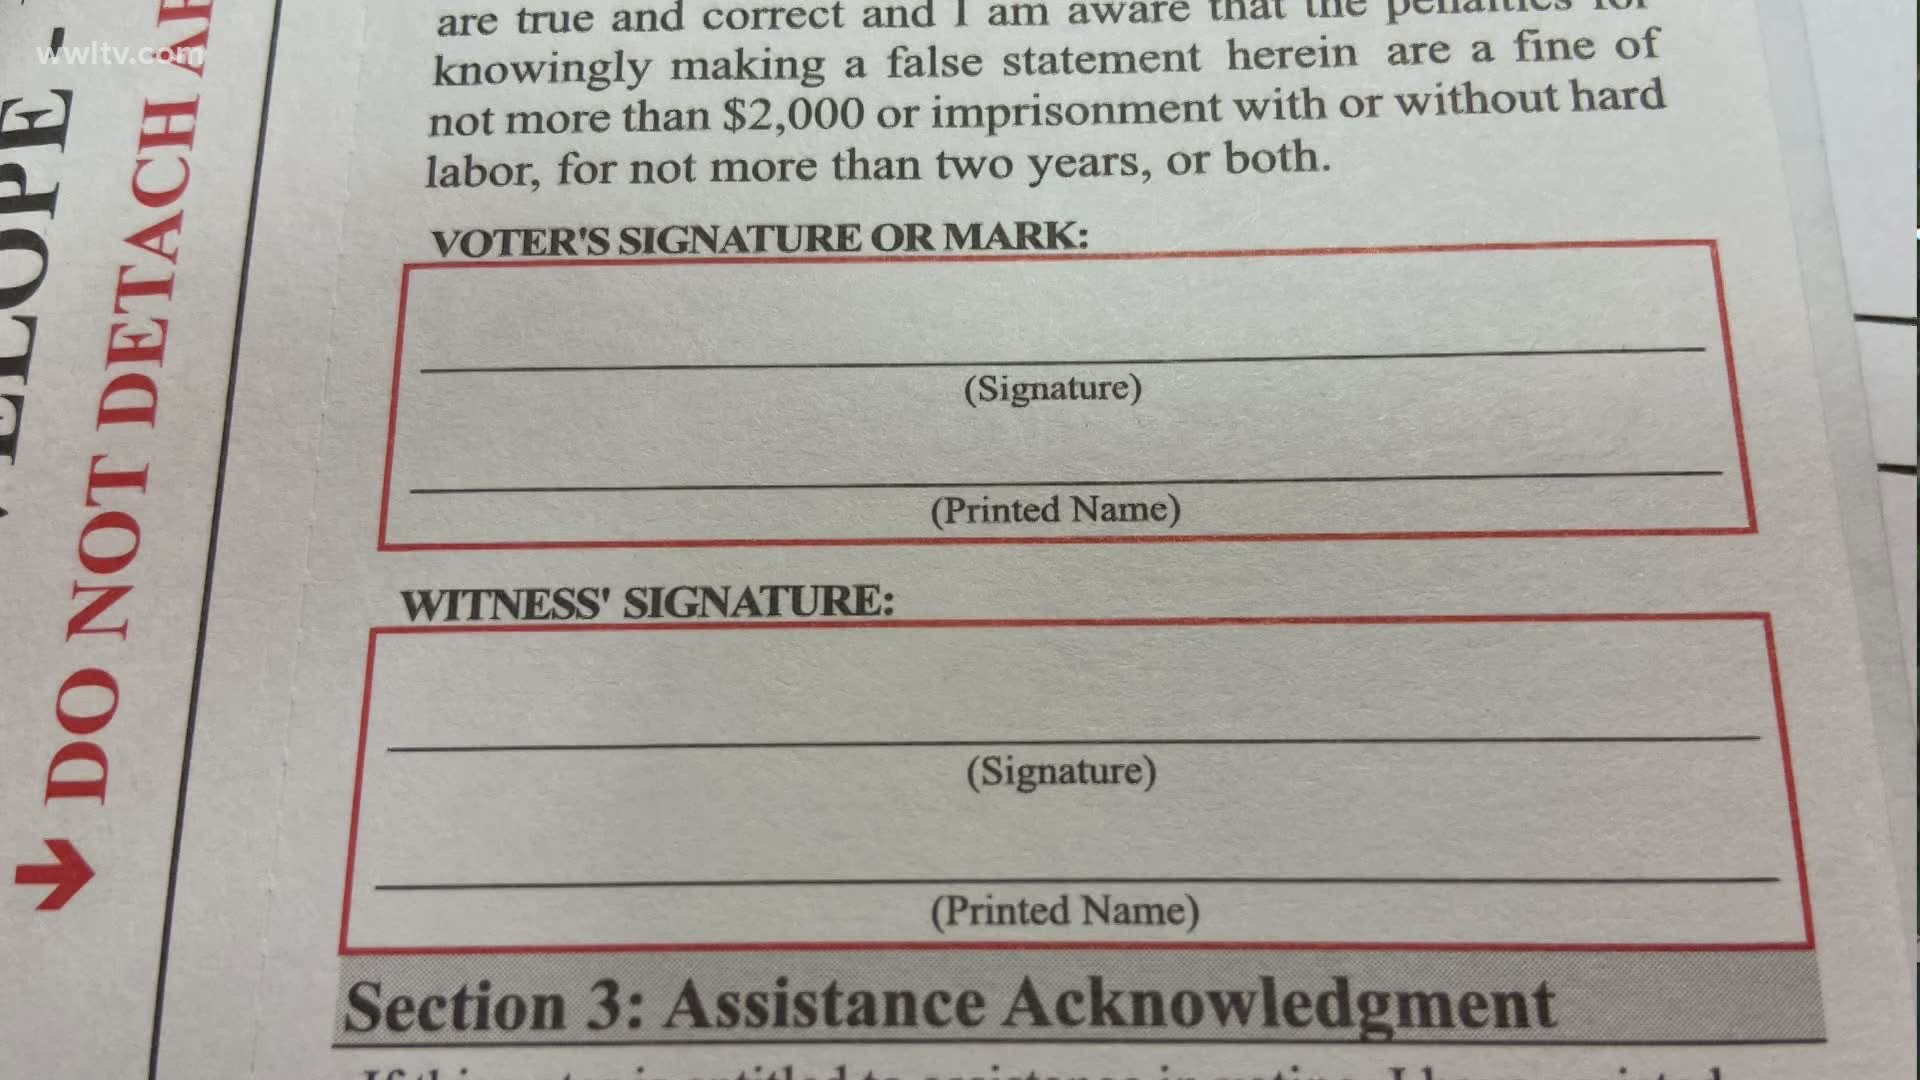 Here's how to file your absentee ballot